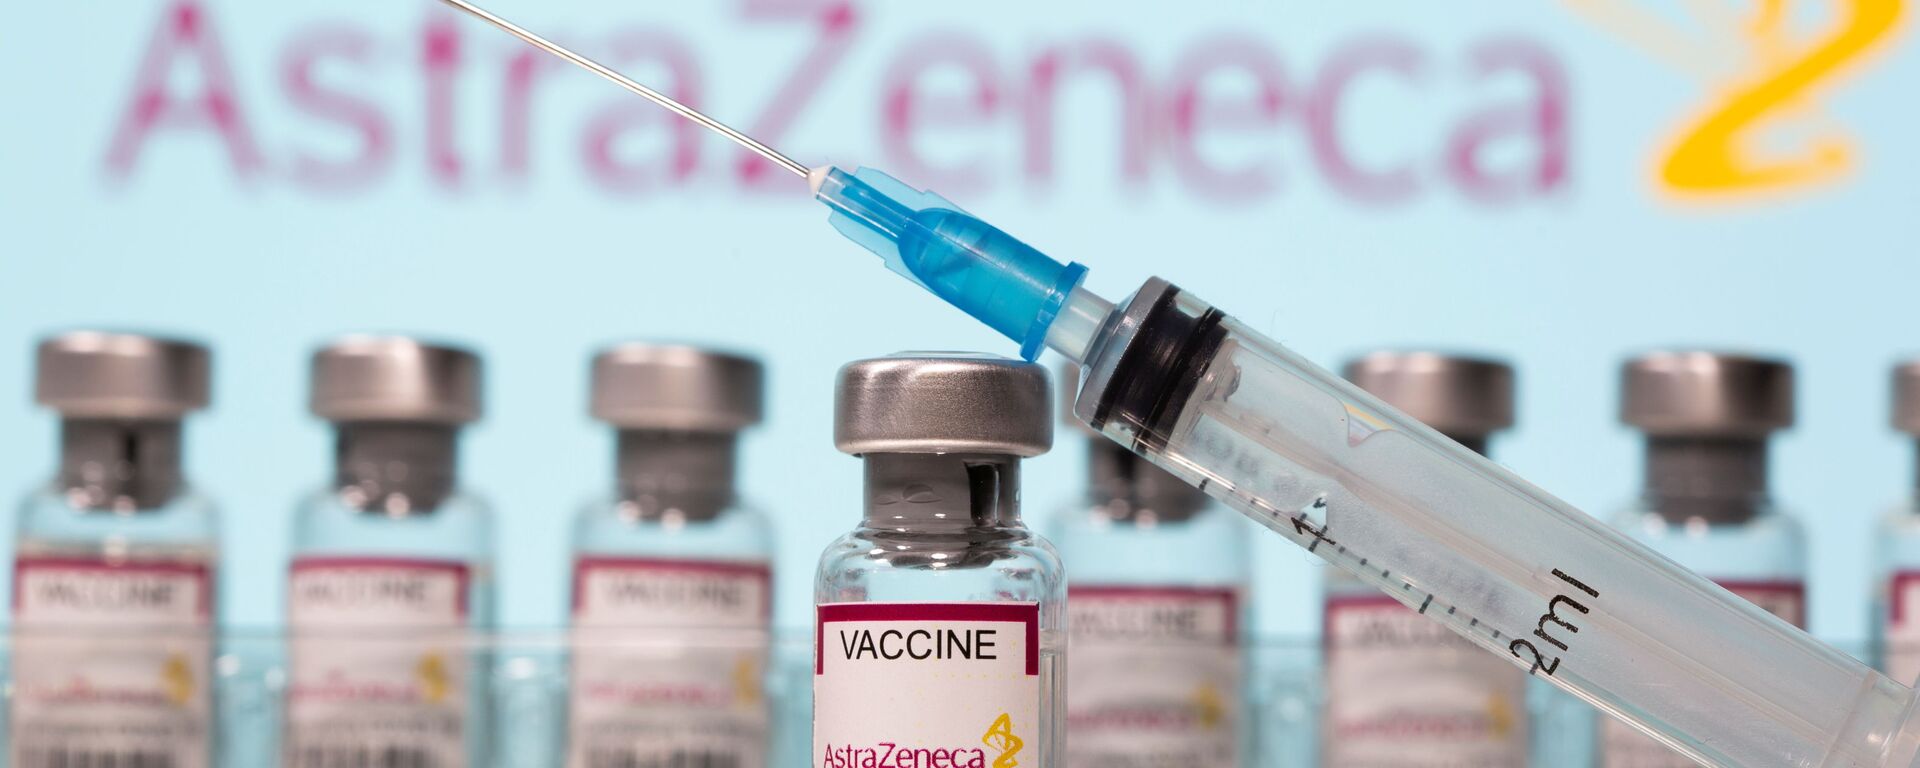 Vials labelled AstraZeneca COVID-19 Coronavirus Vaccine and a syringe are seen in front of a displayed AstraZeneca logo in this illustration taken March 10, 2021. REUTERS/Dado Ruvic/Illustration - Sputnik International, 1920